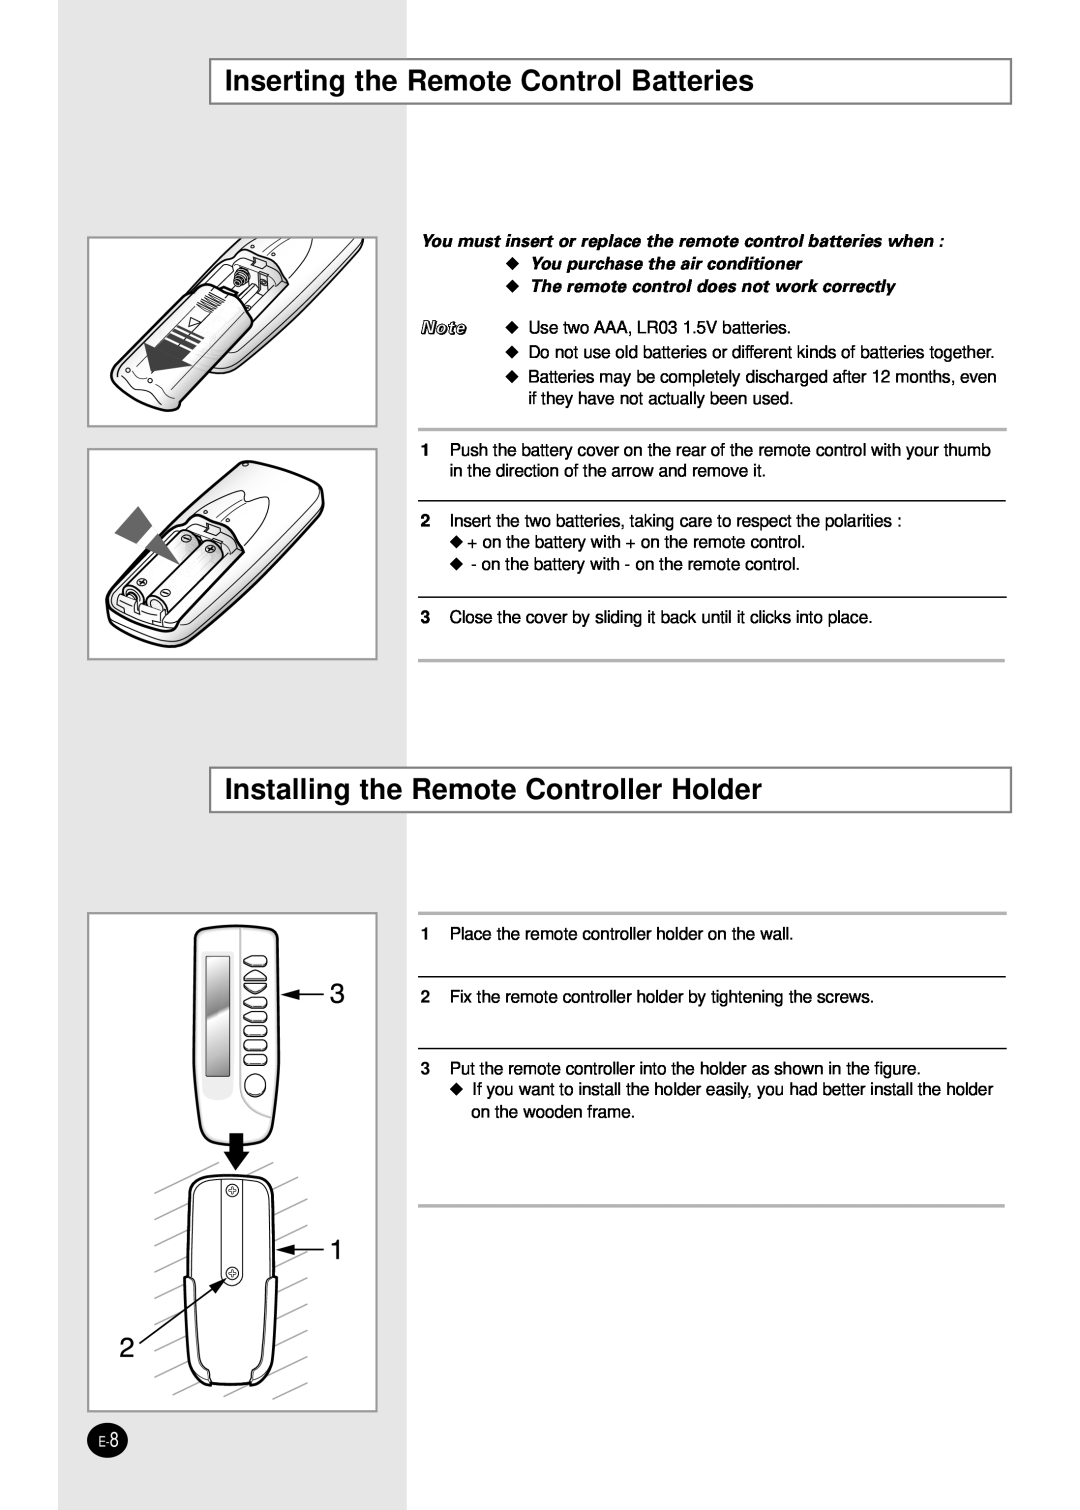 Samsung AM27B1(B2)C13 installation manual Inserting the Remote Control Batteries, Installing the Remote Controller Holder 